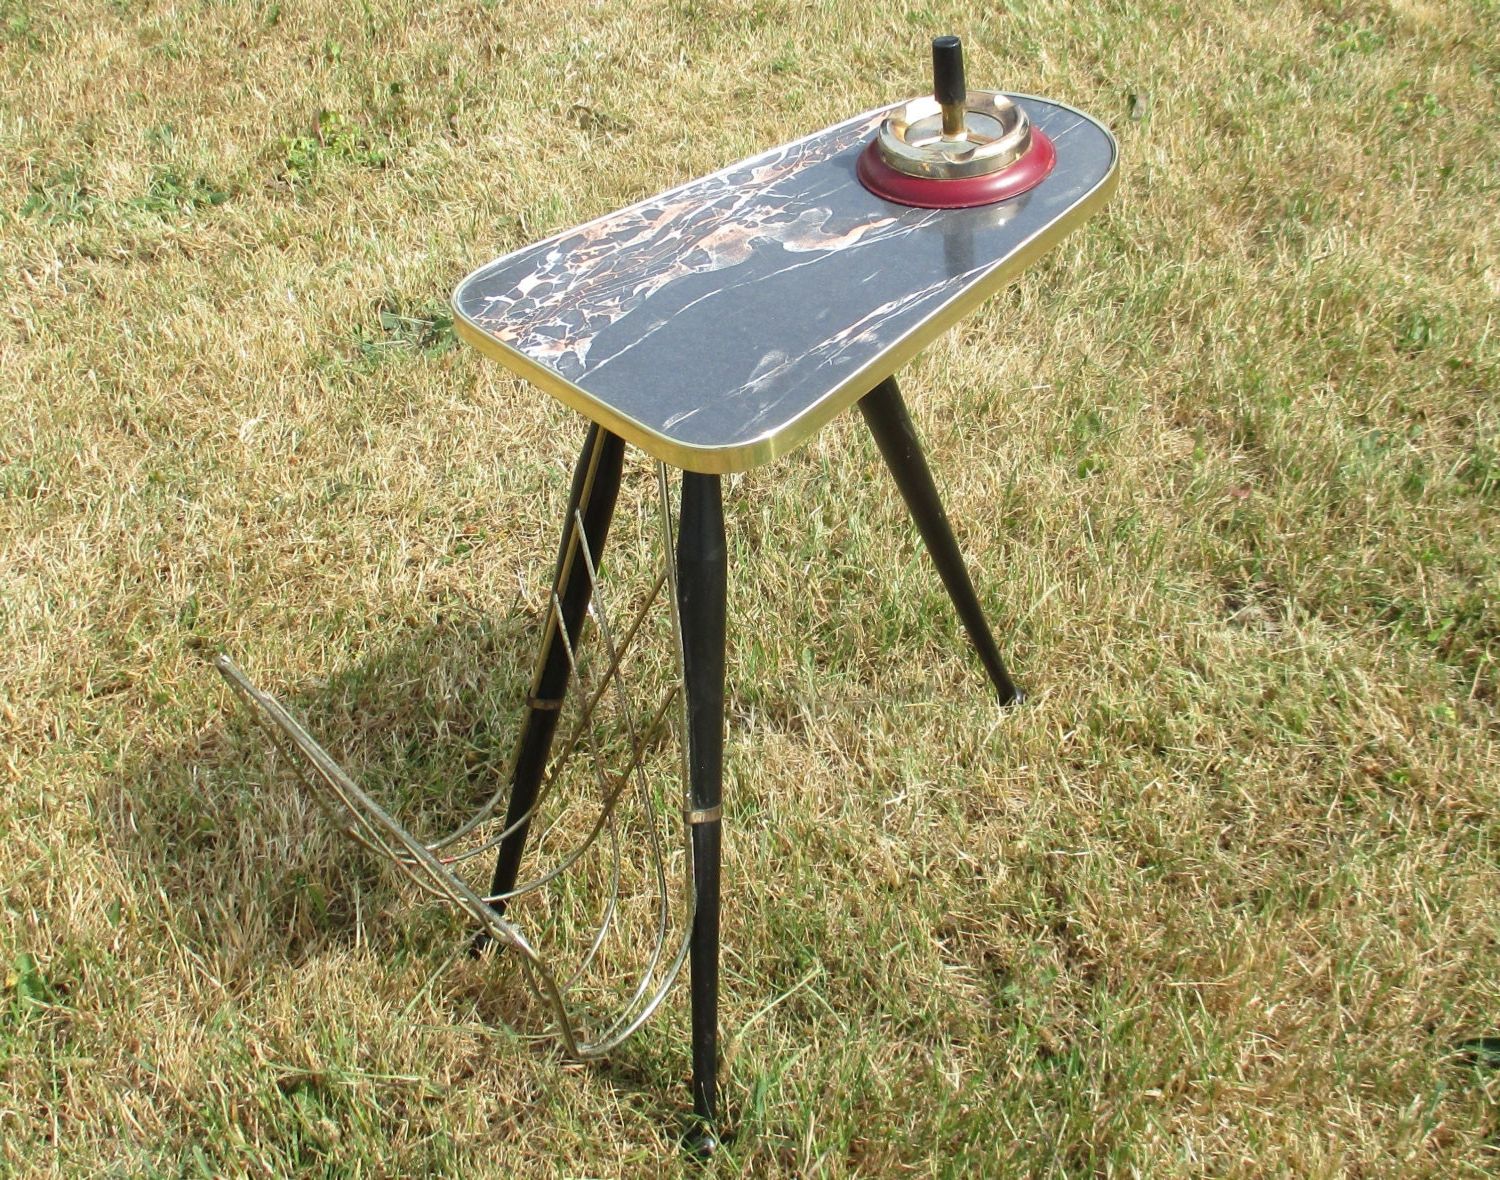 Retro Vintage Tripod Coffee Table Side Table Ashtray Mid In Recent Coffee Tables With Tripod Legs (View 5 of 20)